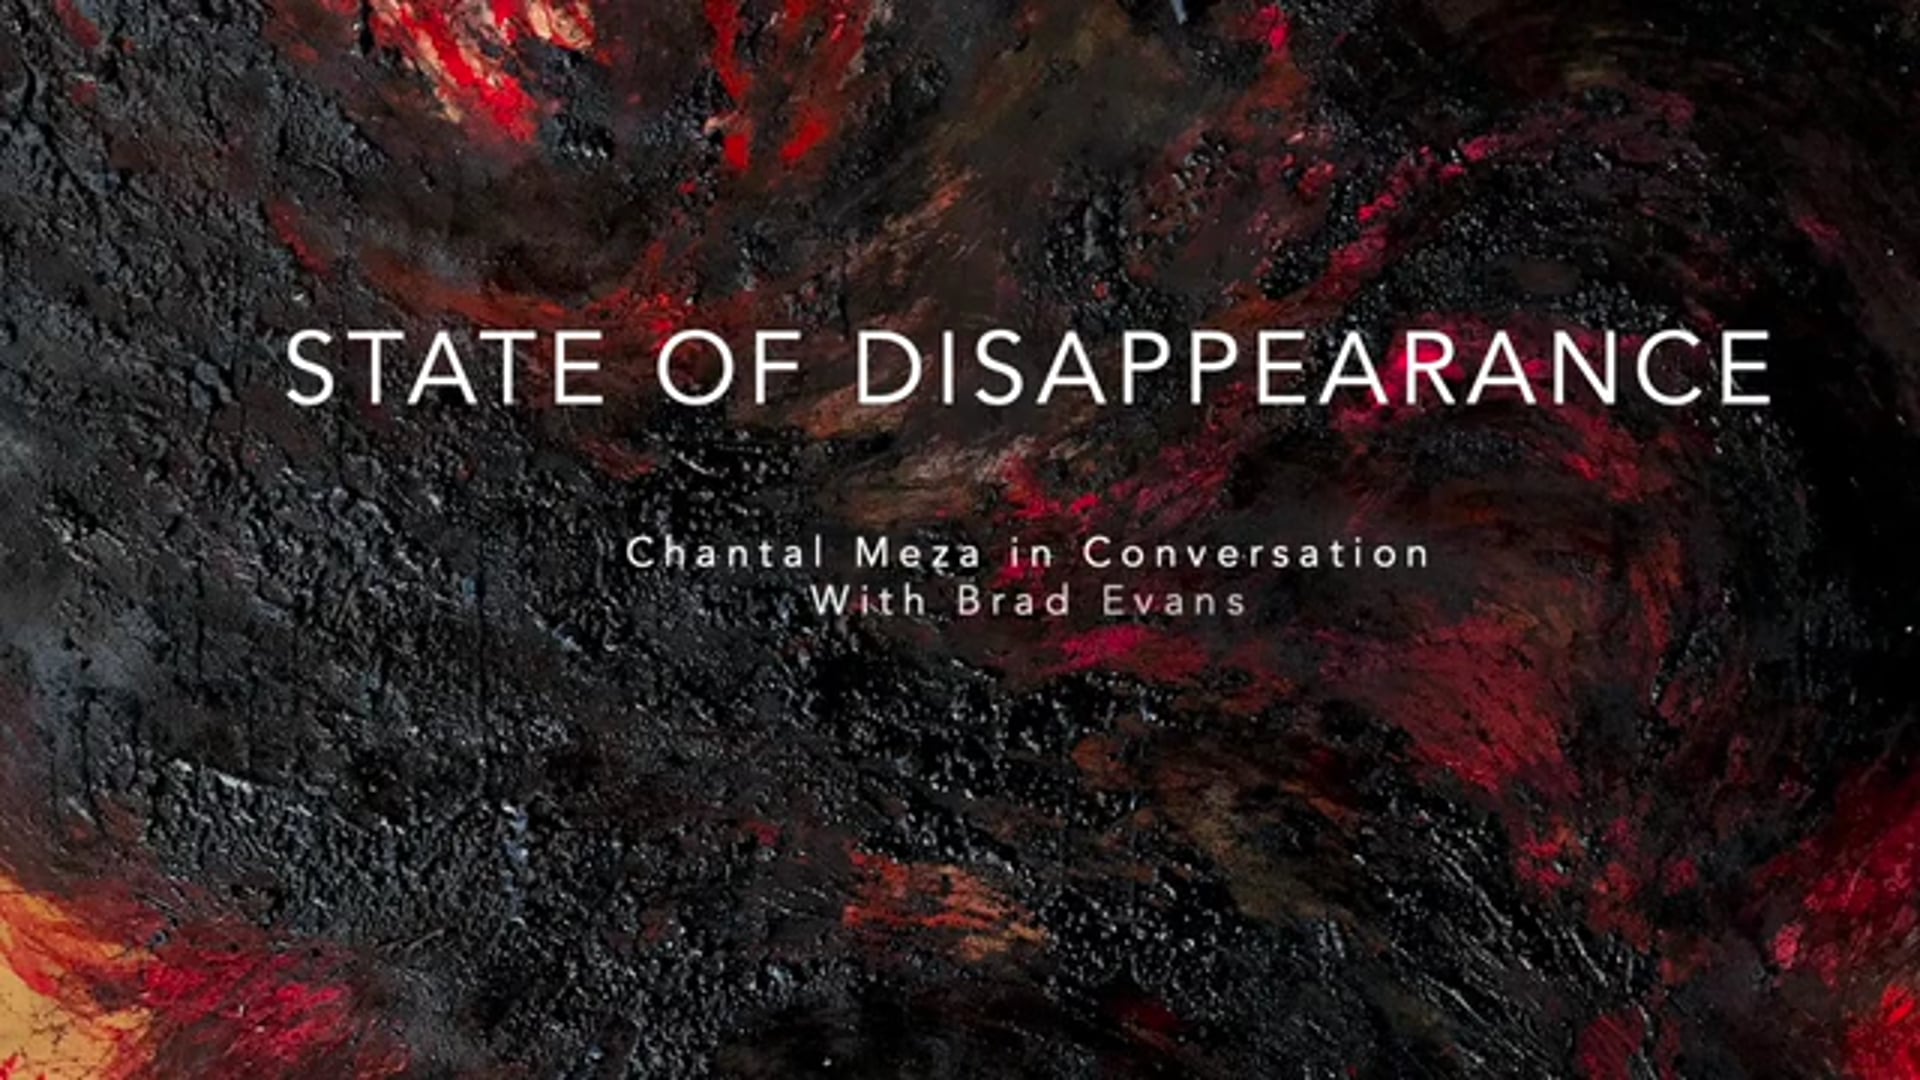 State of Disappearance